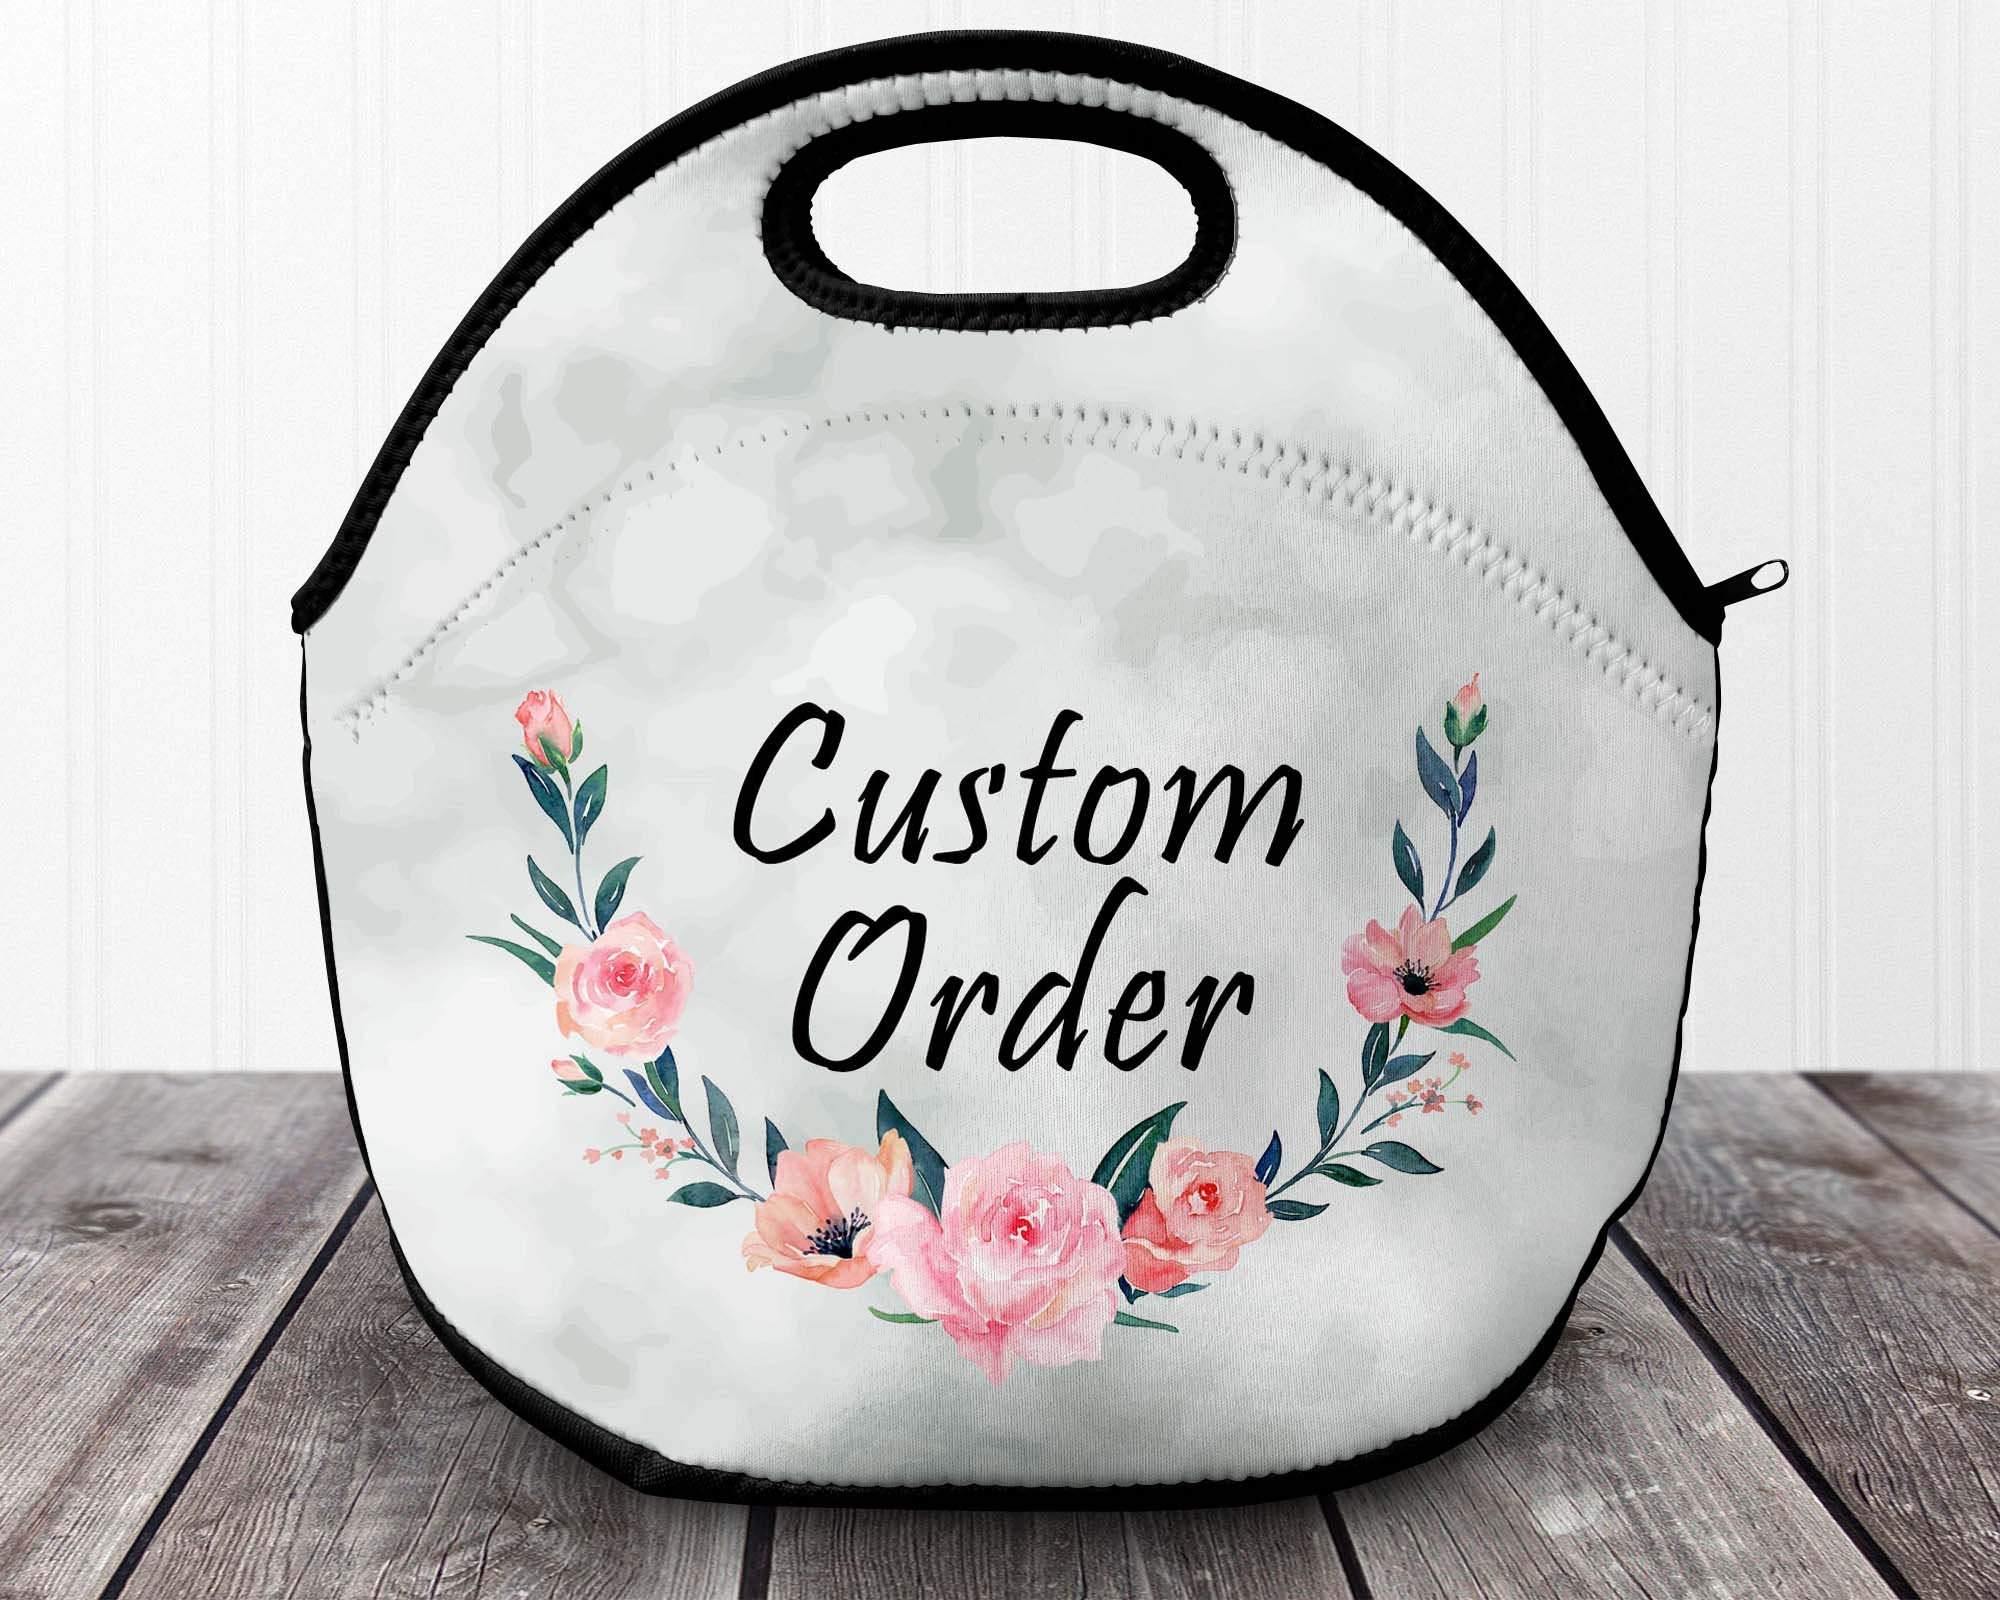 Personalized Lunch Bags | Custom Bags | Custom Order - This & That Solutions - Personalized Lunch Bags | Custom Bags | Custom Order - Personalized Gifts & Custom Home Decor